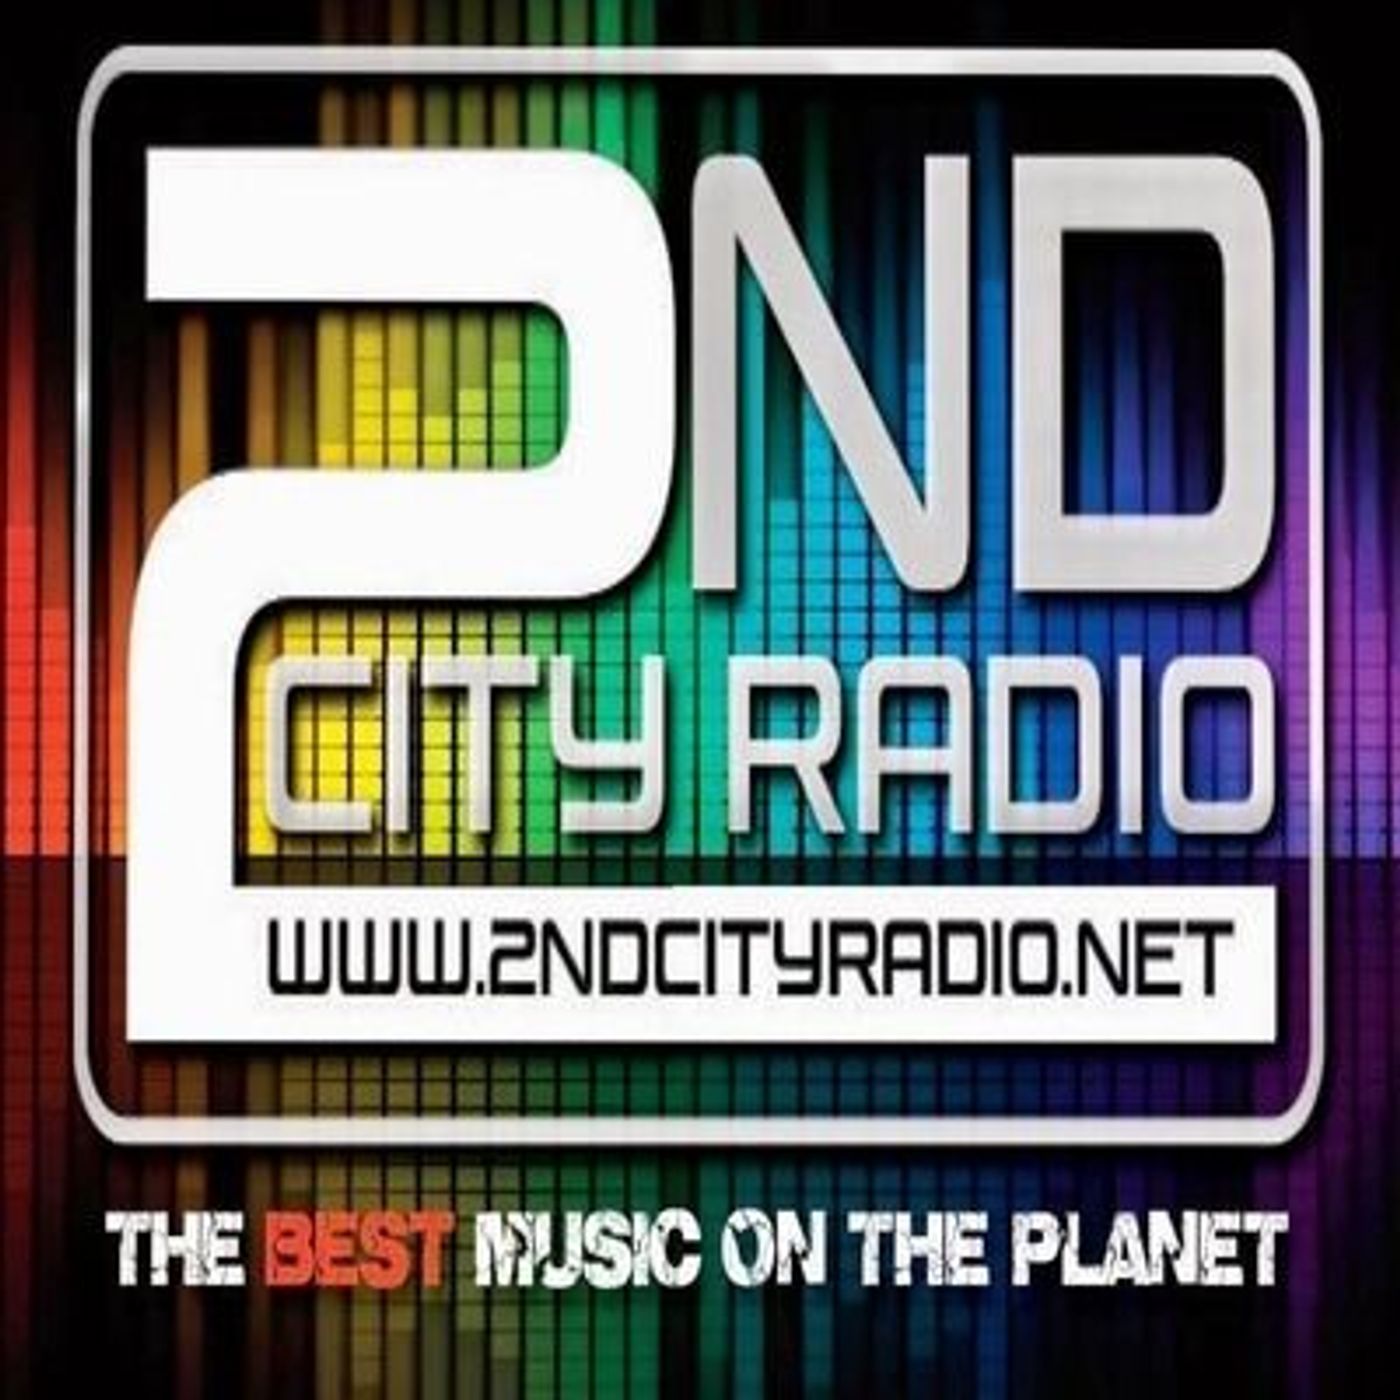 Friday the 29th of April 2022 on 2ndcity Radio with Classic Chat